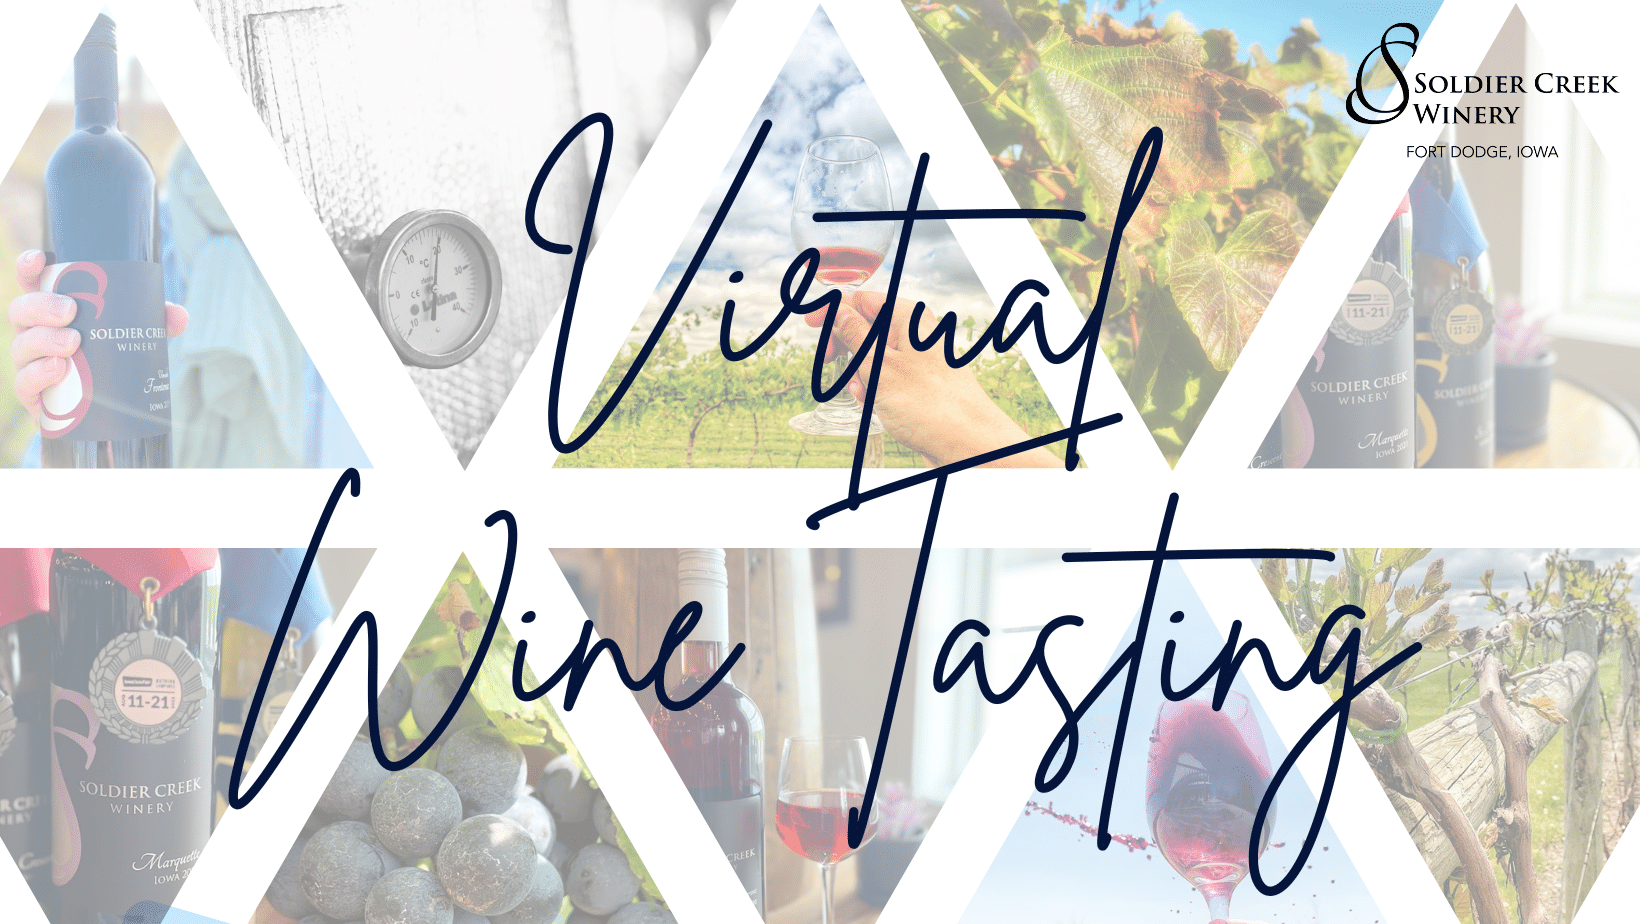 virtual wine tastings by soldier creek winery. select days, always at 4pm. try wines with our winemaker, Anne!